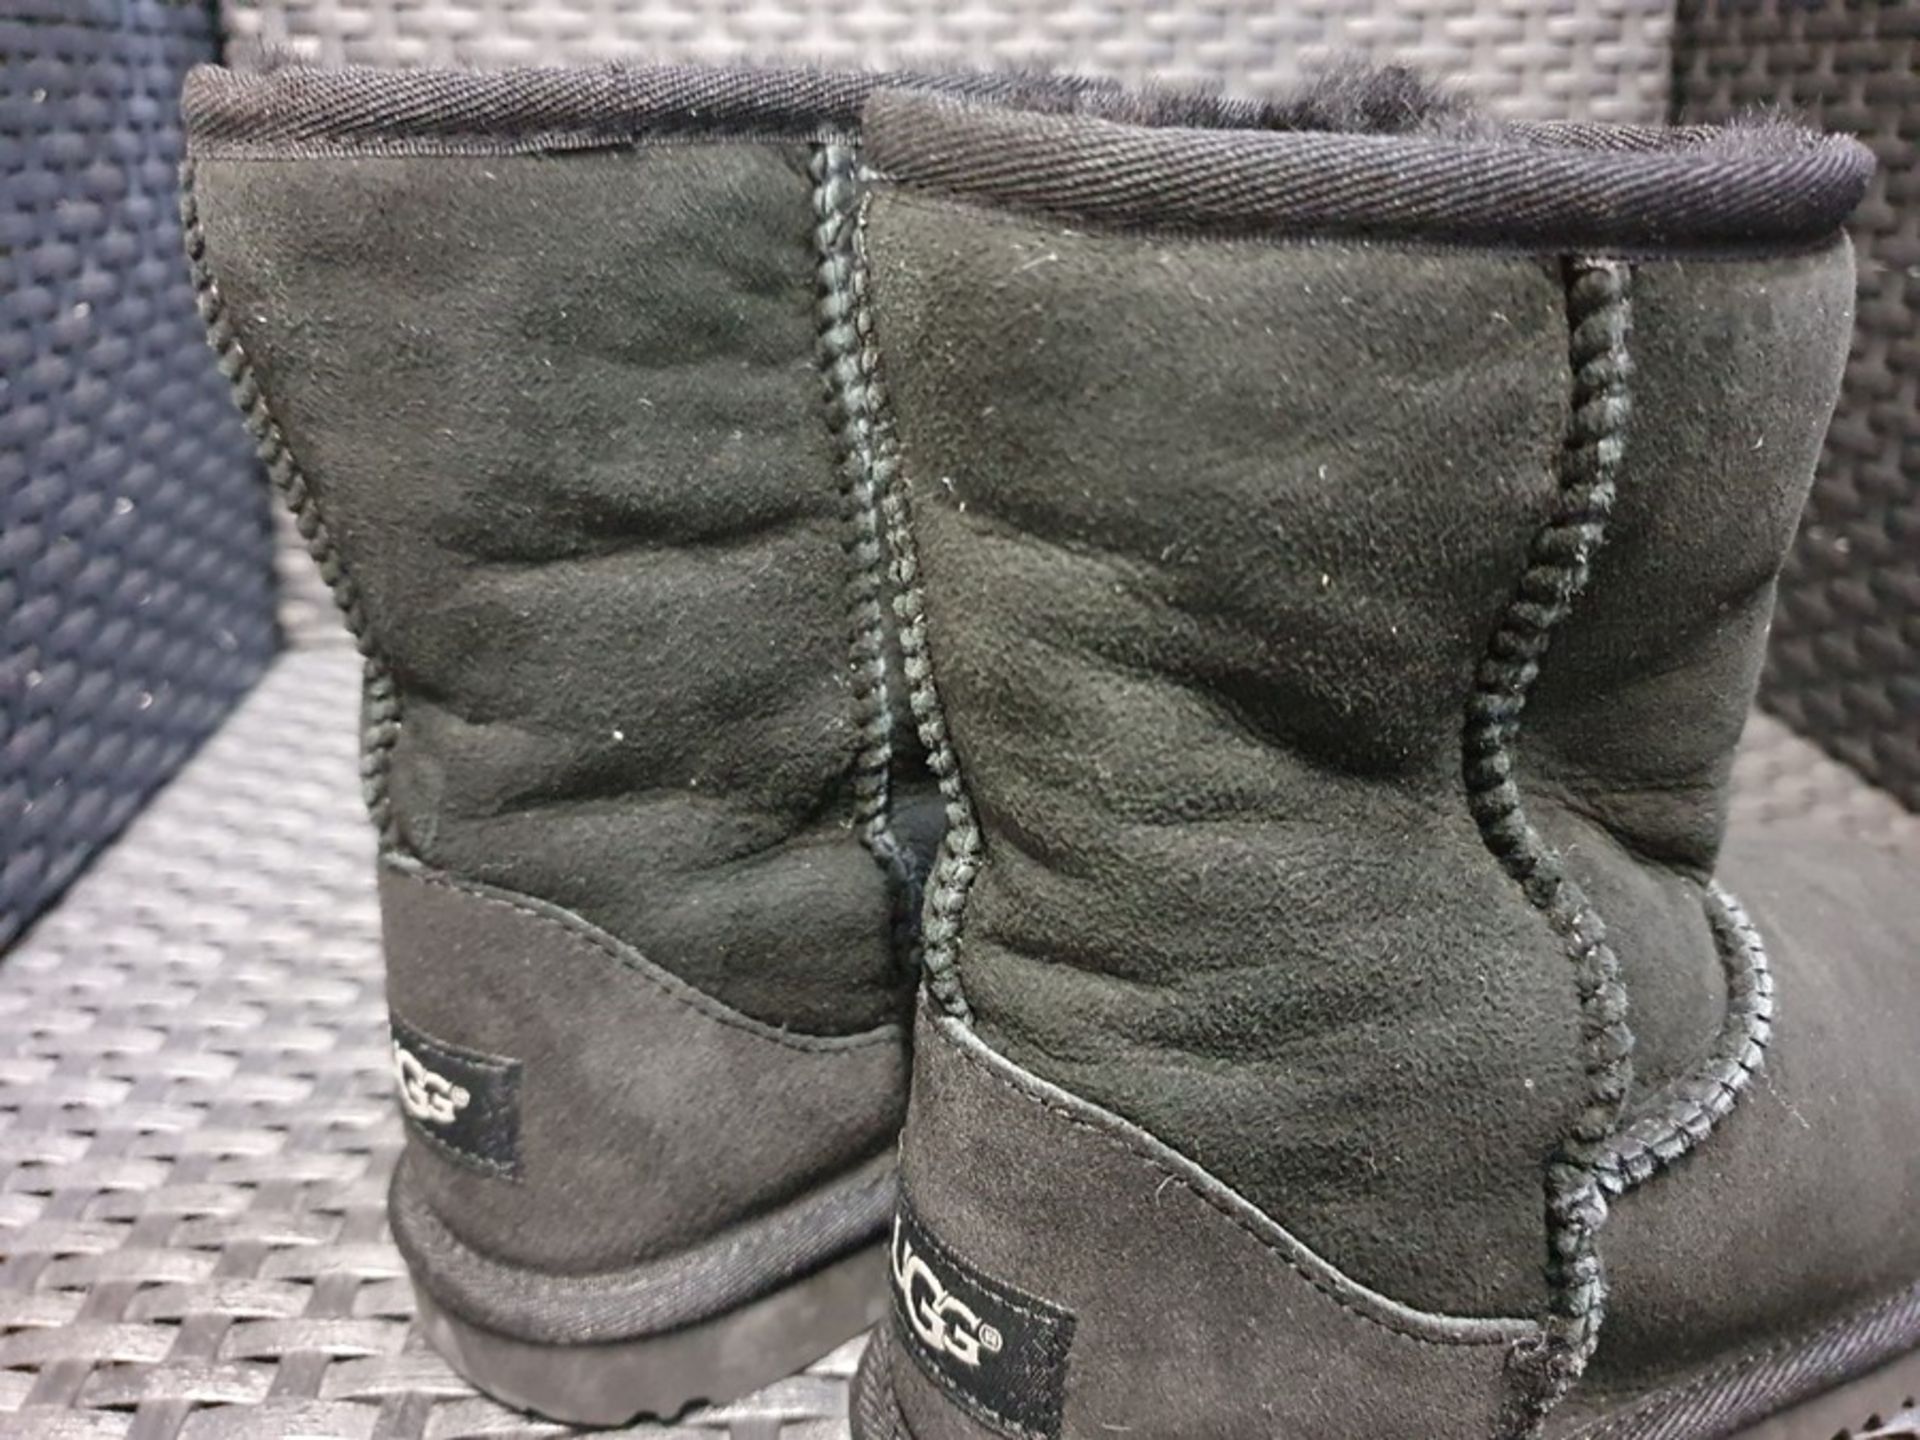 ONE PAIR OF UGG CLASSIC II SUEDE BOOTS WITH FAUX FUR LINING IN BLACK - SIZE UK 2. RRP £145.00. GRADE - Image 3 of 3